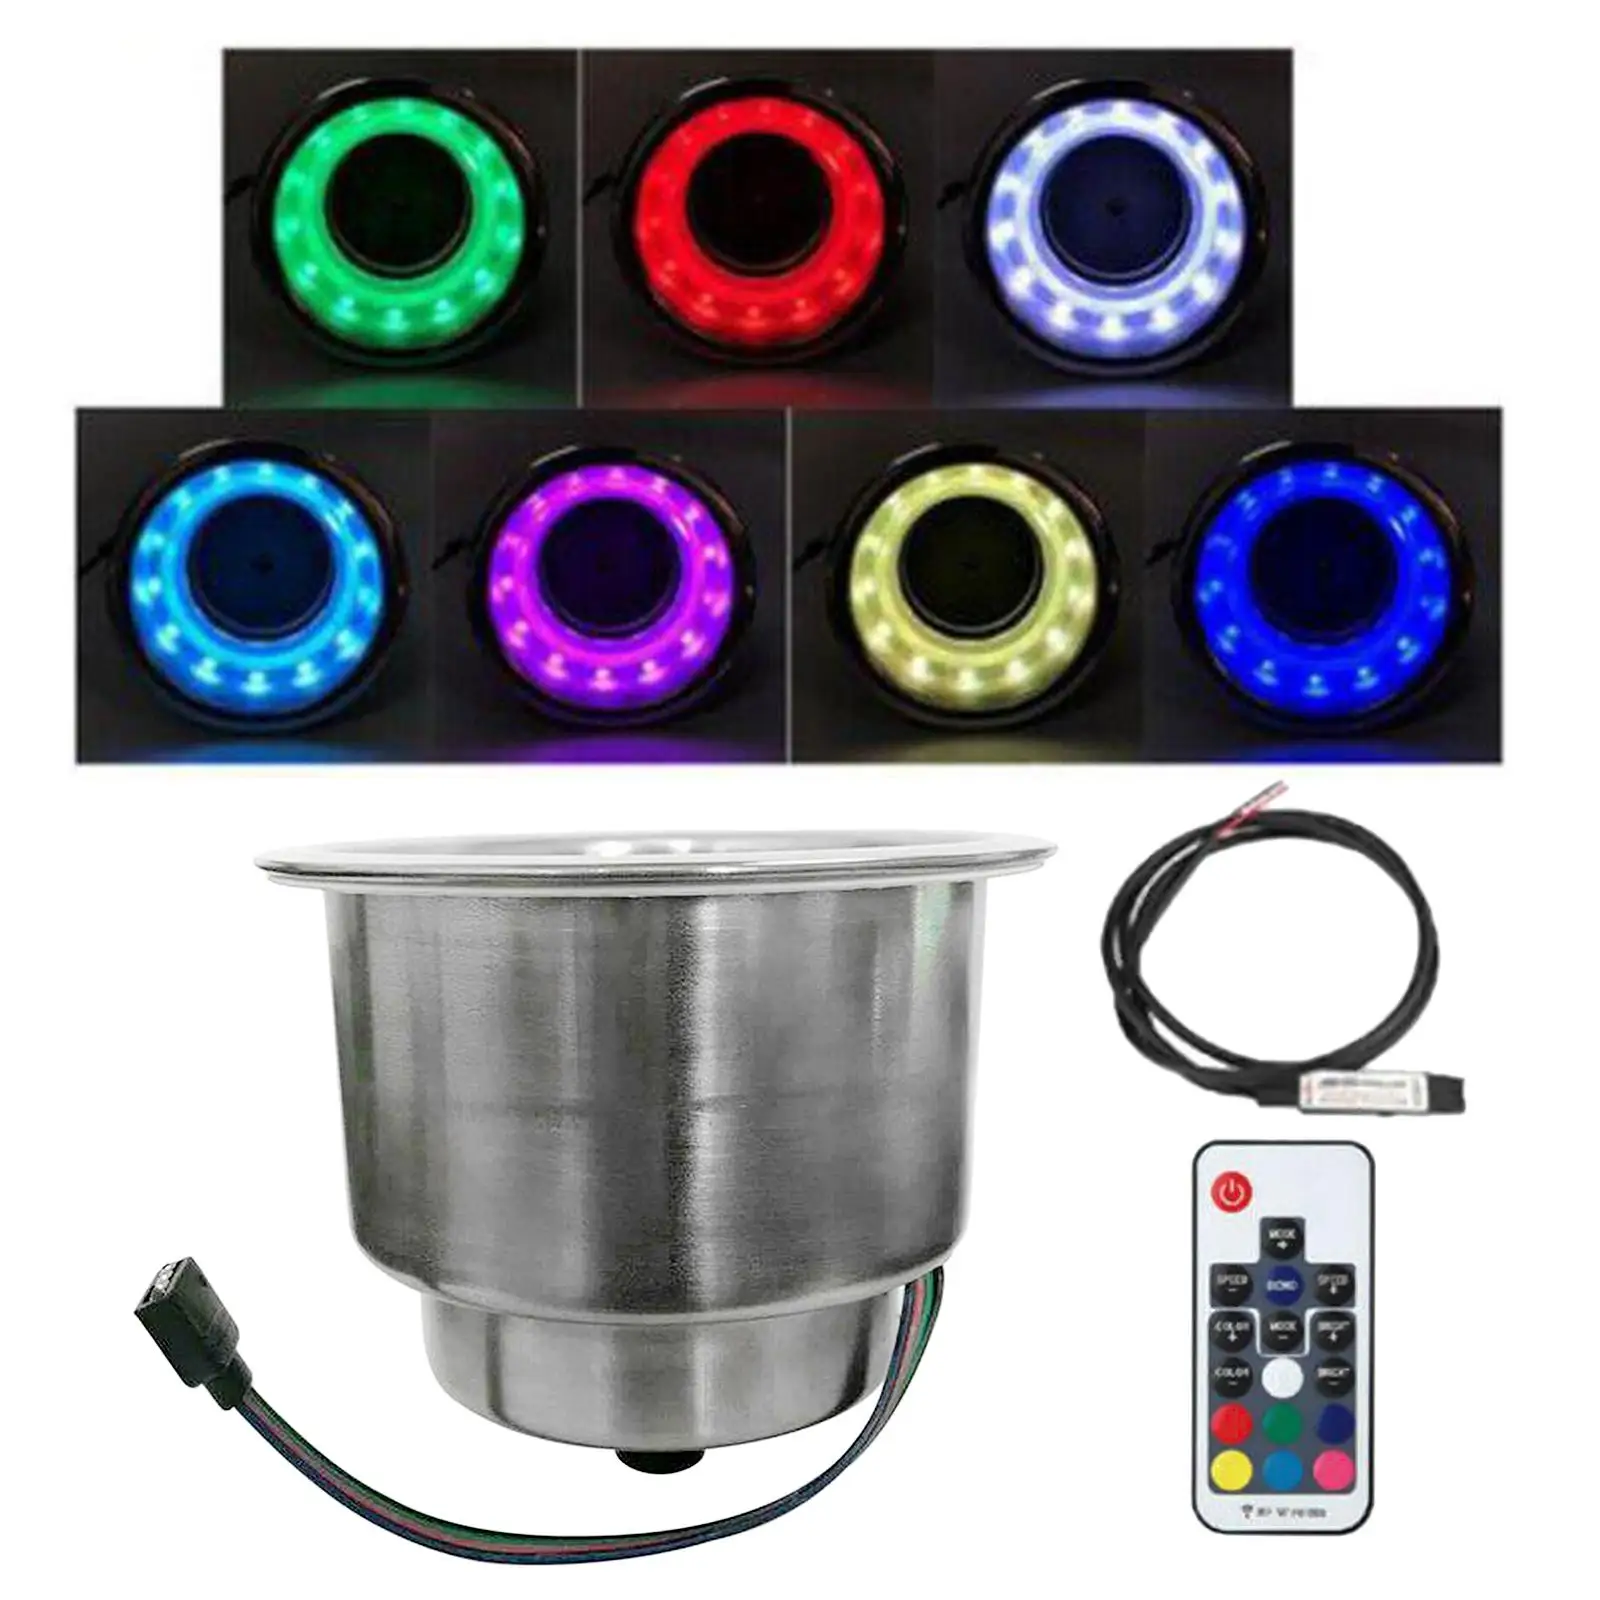 RGB Light Stainless Steel cup Holder with Remote Control for Marine,